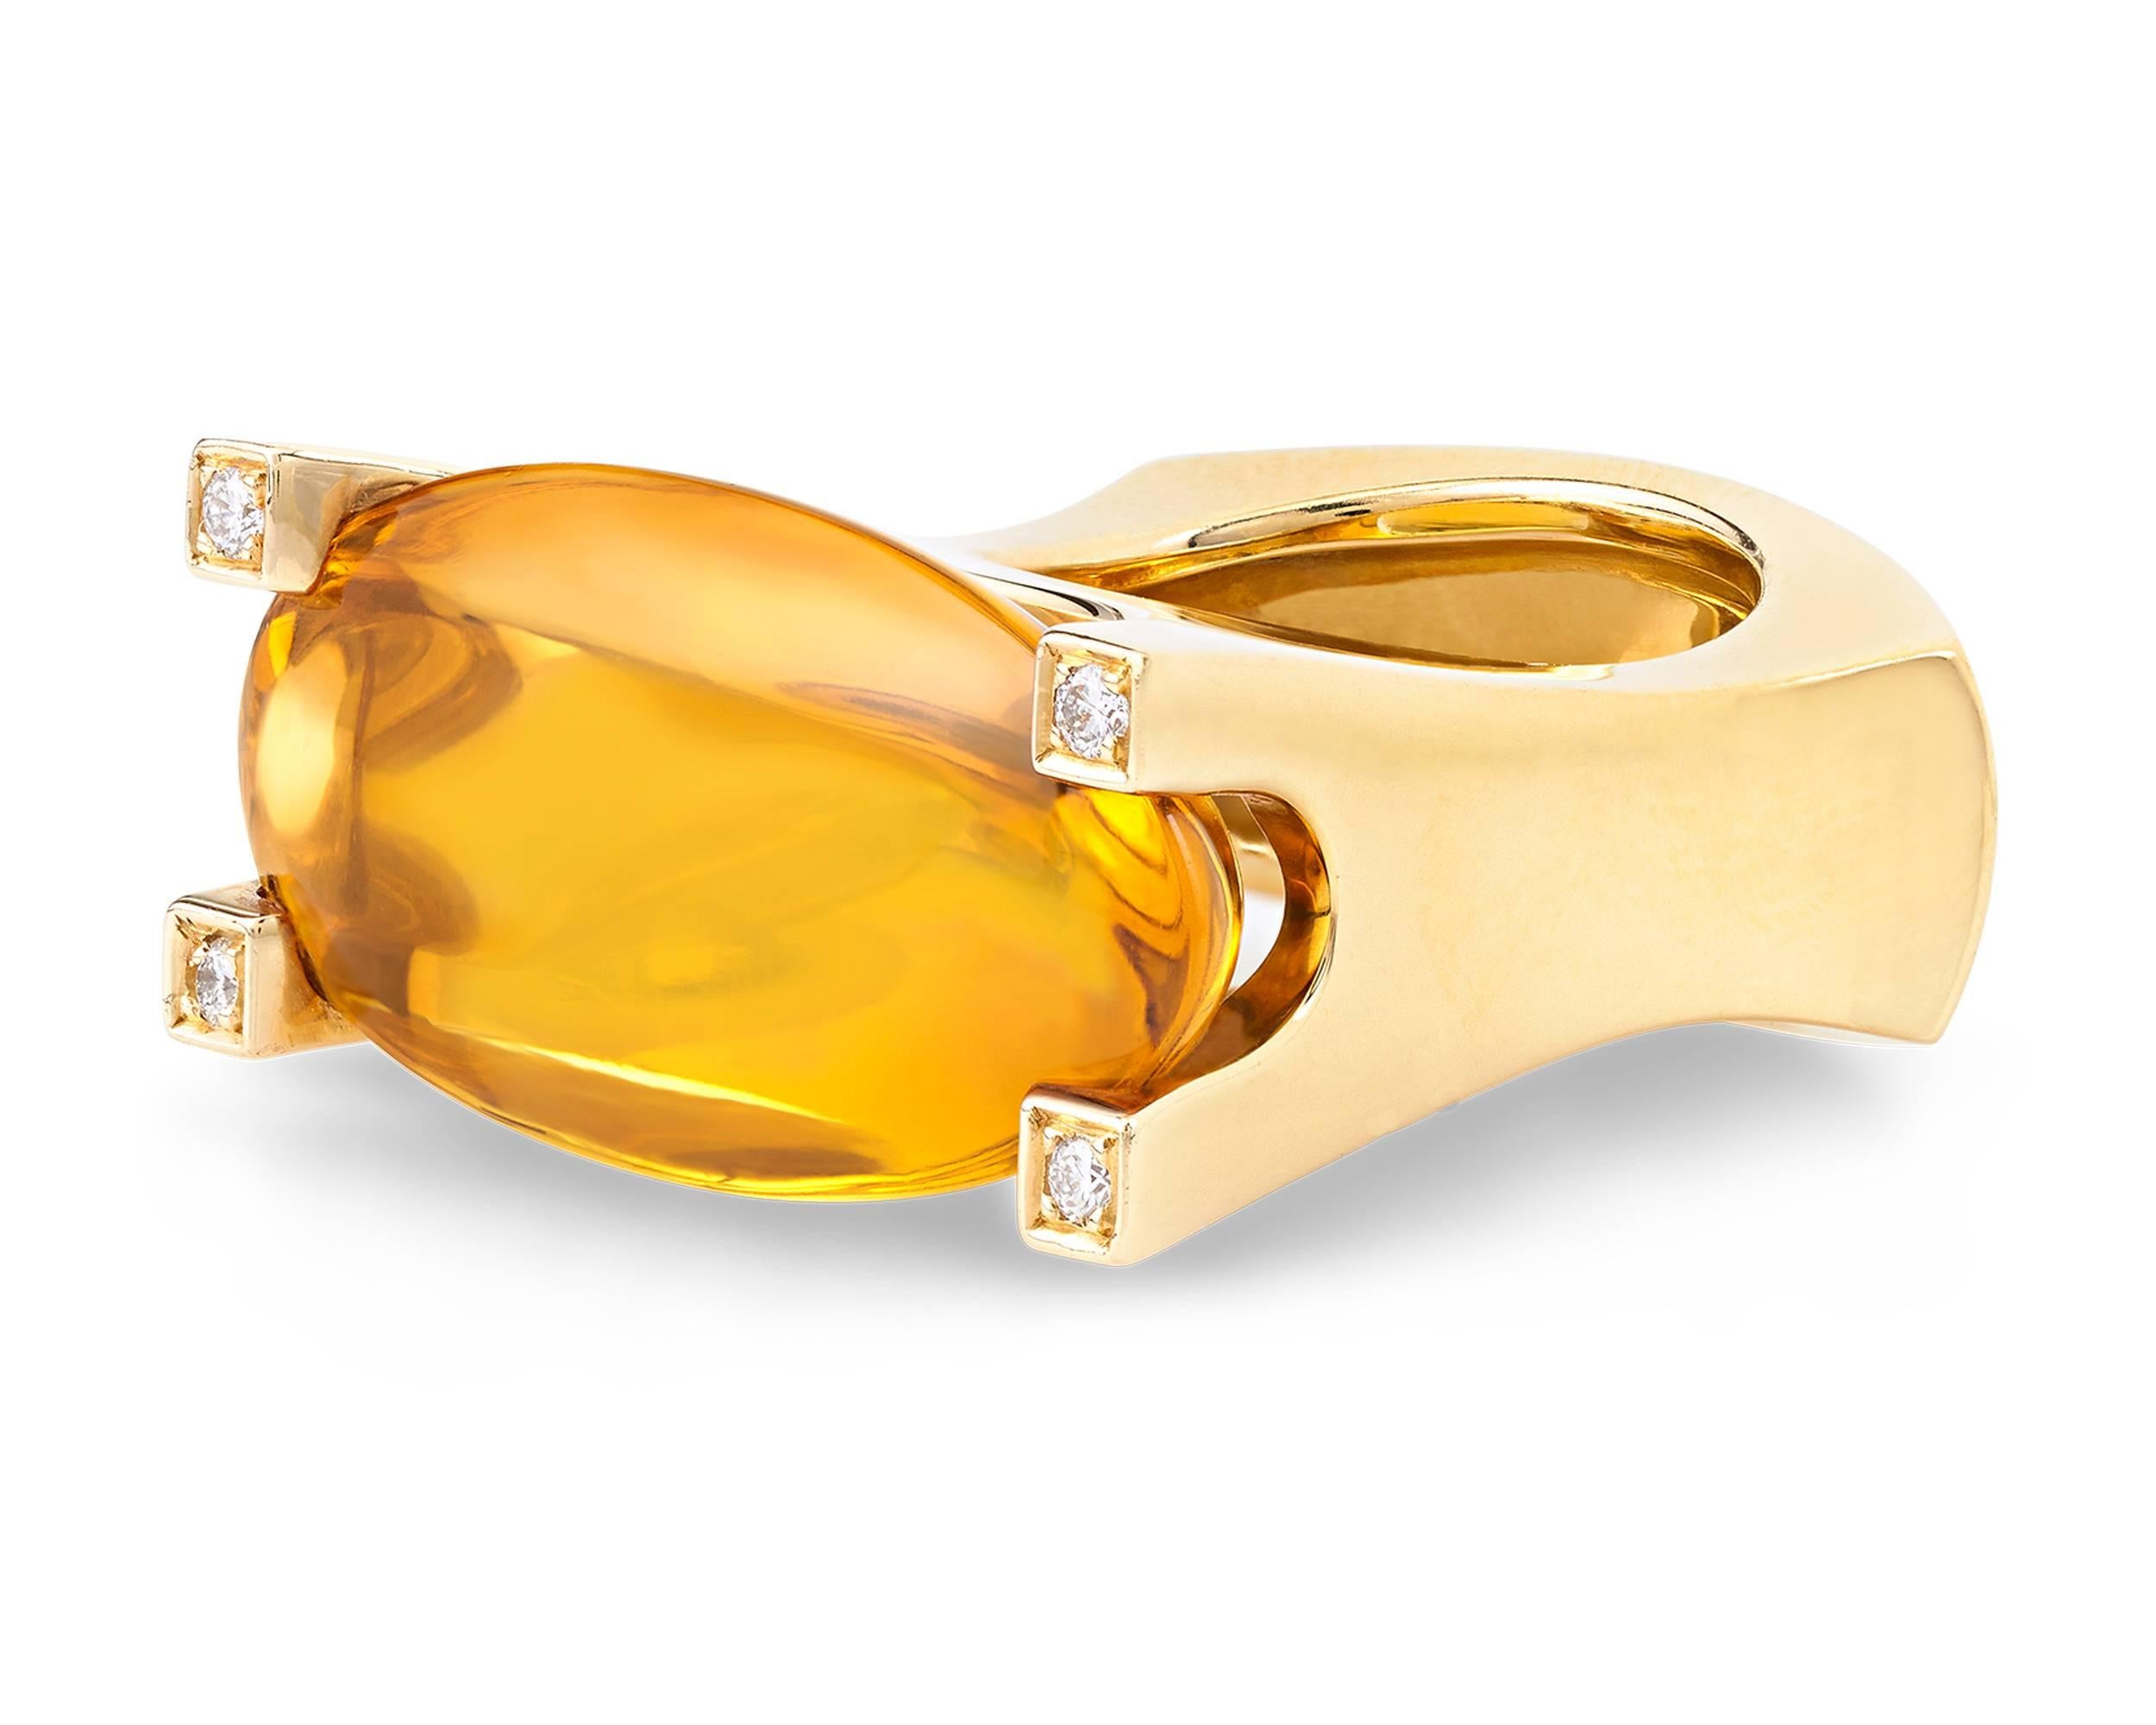 Combining exquisite gems and daring design, this ring by Van Cleef & Arpels is a standout example of retro cocktail jewelry. The bold 18K yellow gold form features a monumental golden citrine totaling approximately 35 carats, with four white